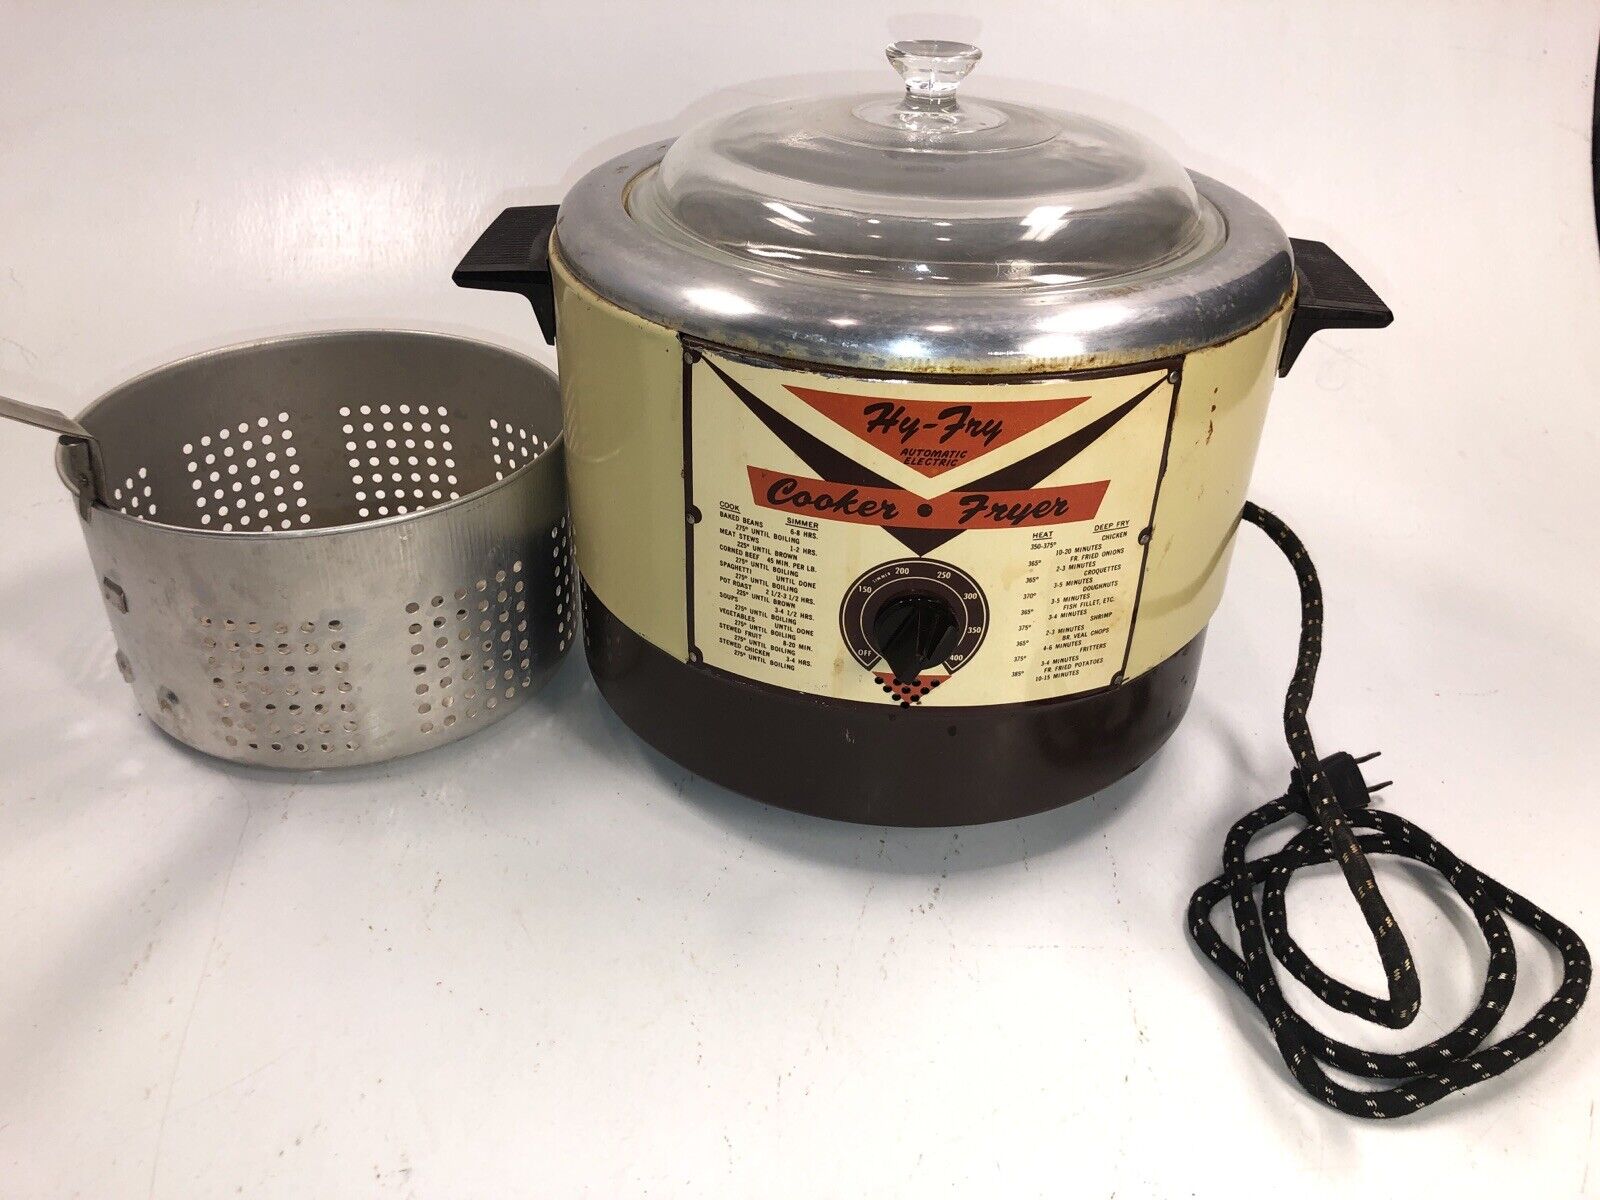 Vintage HY FRY Automatic Electric Cooker Fryer #M-200 Made in USA Works